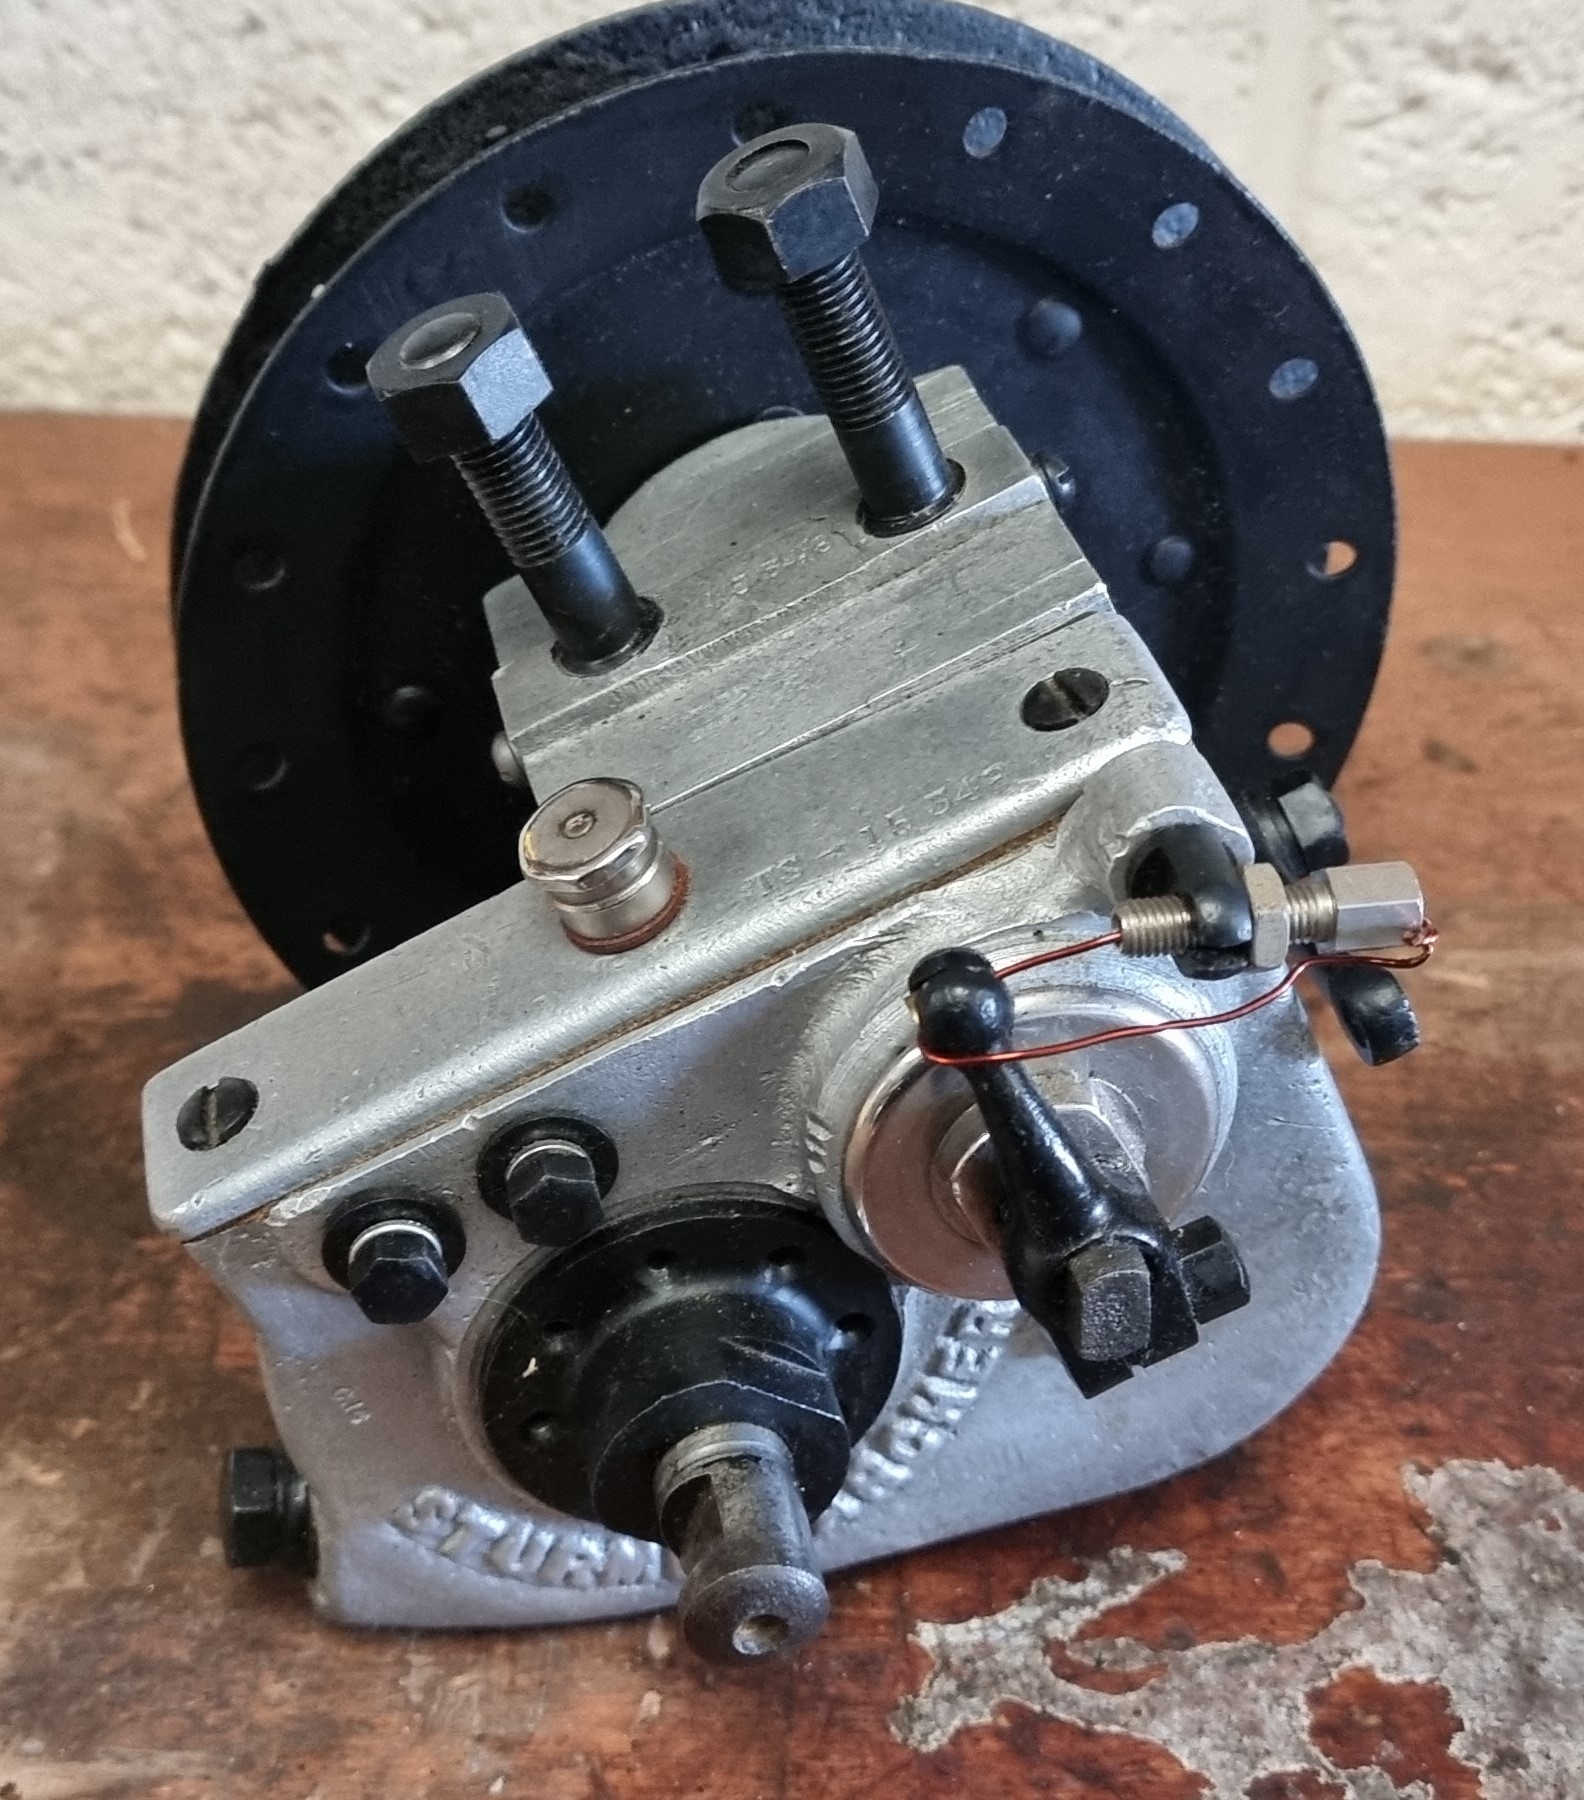 A vintage/veteran Sturmey Archer gearbox, TS 15348, believed reconditioned, as used on a Levis.